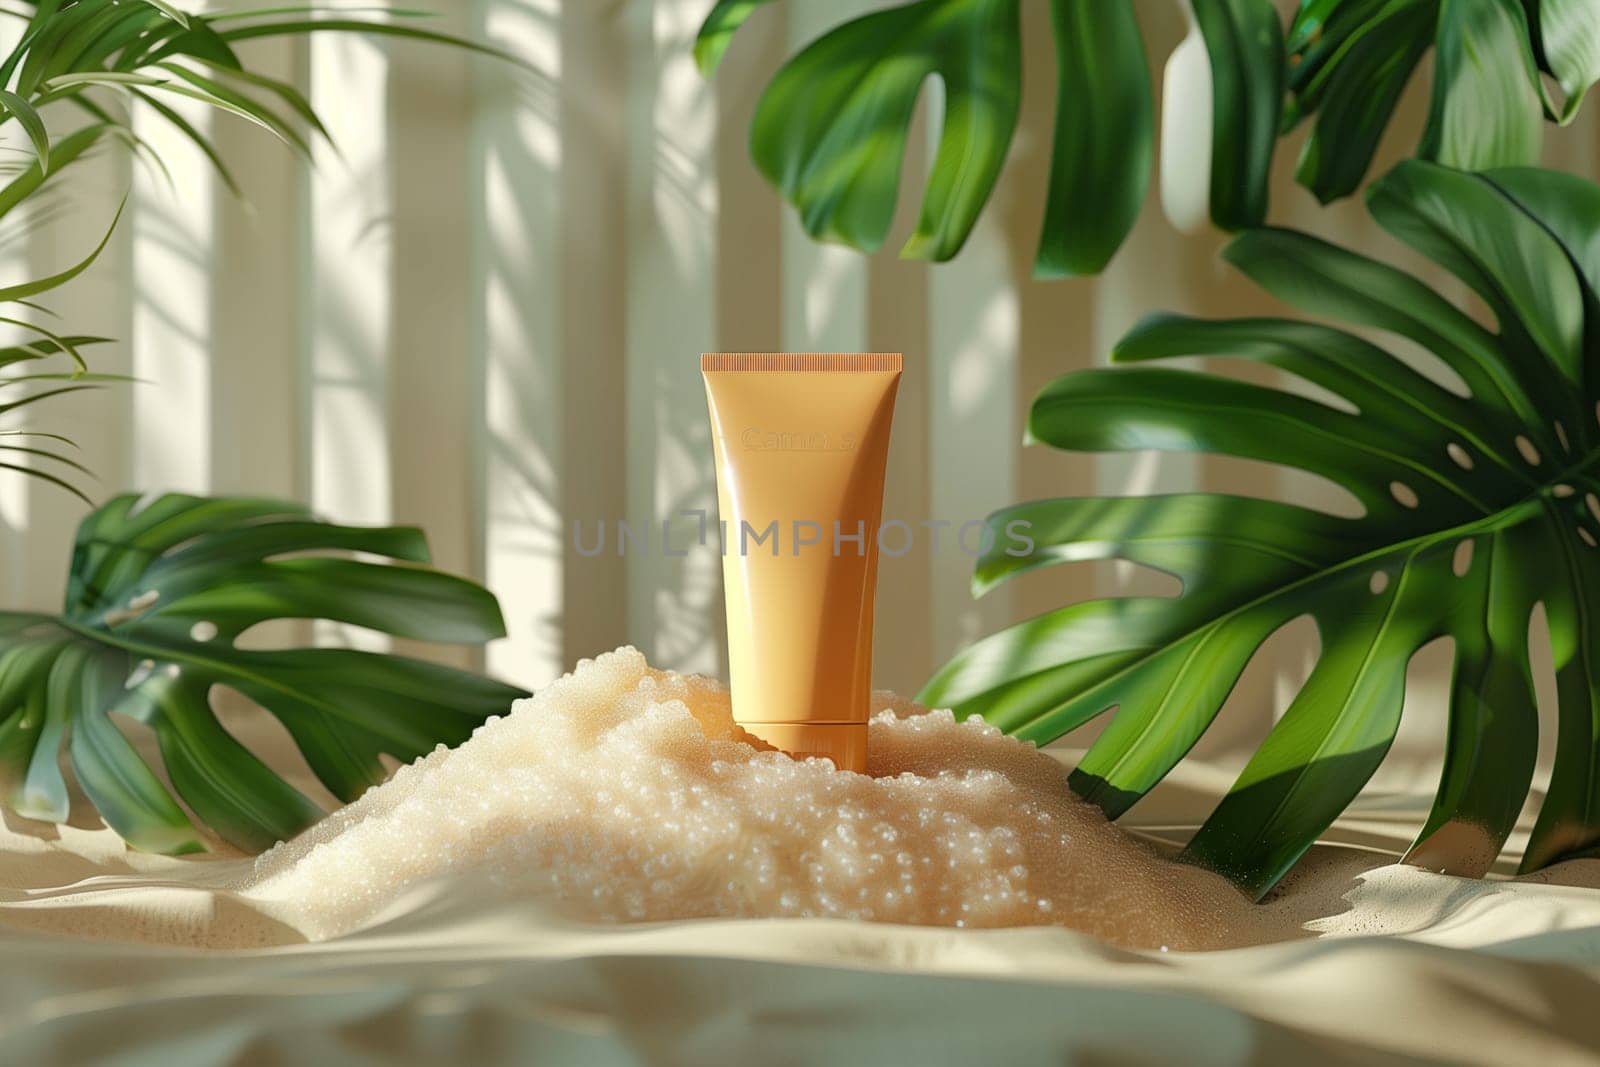 A tube of cream rests on a bed of white grains. Lush green leaves frame the scene.